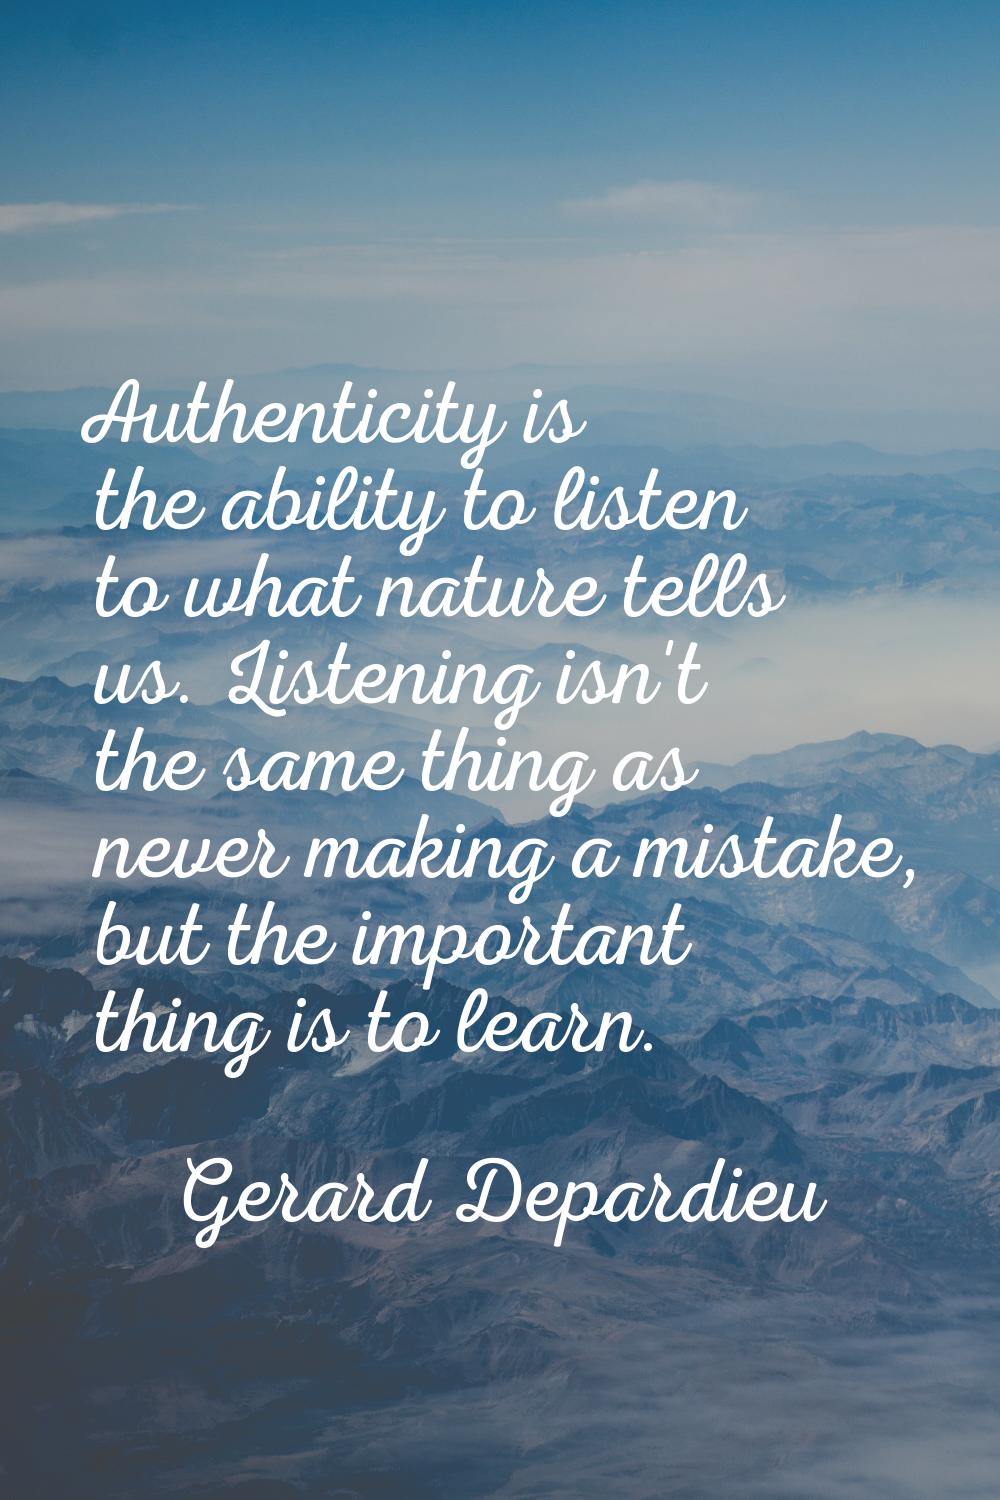 Authenticity is the ability to listen to what nature tells us. Listening isn't the same thing as ne